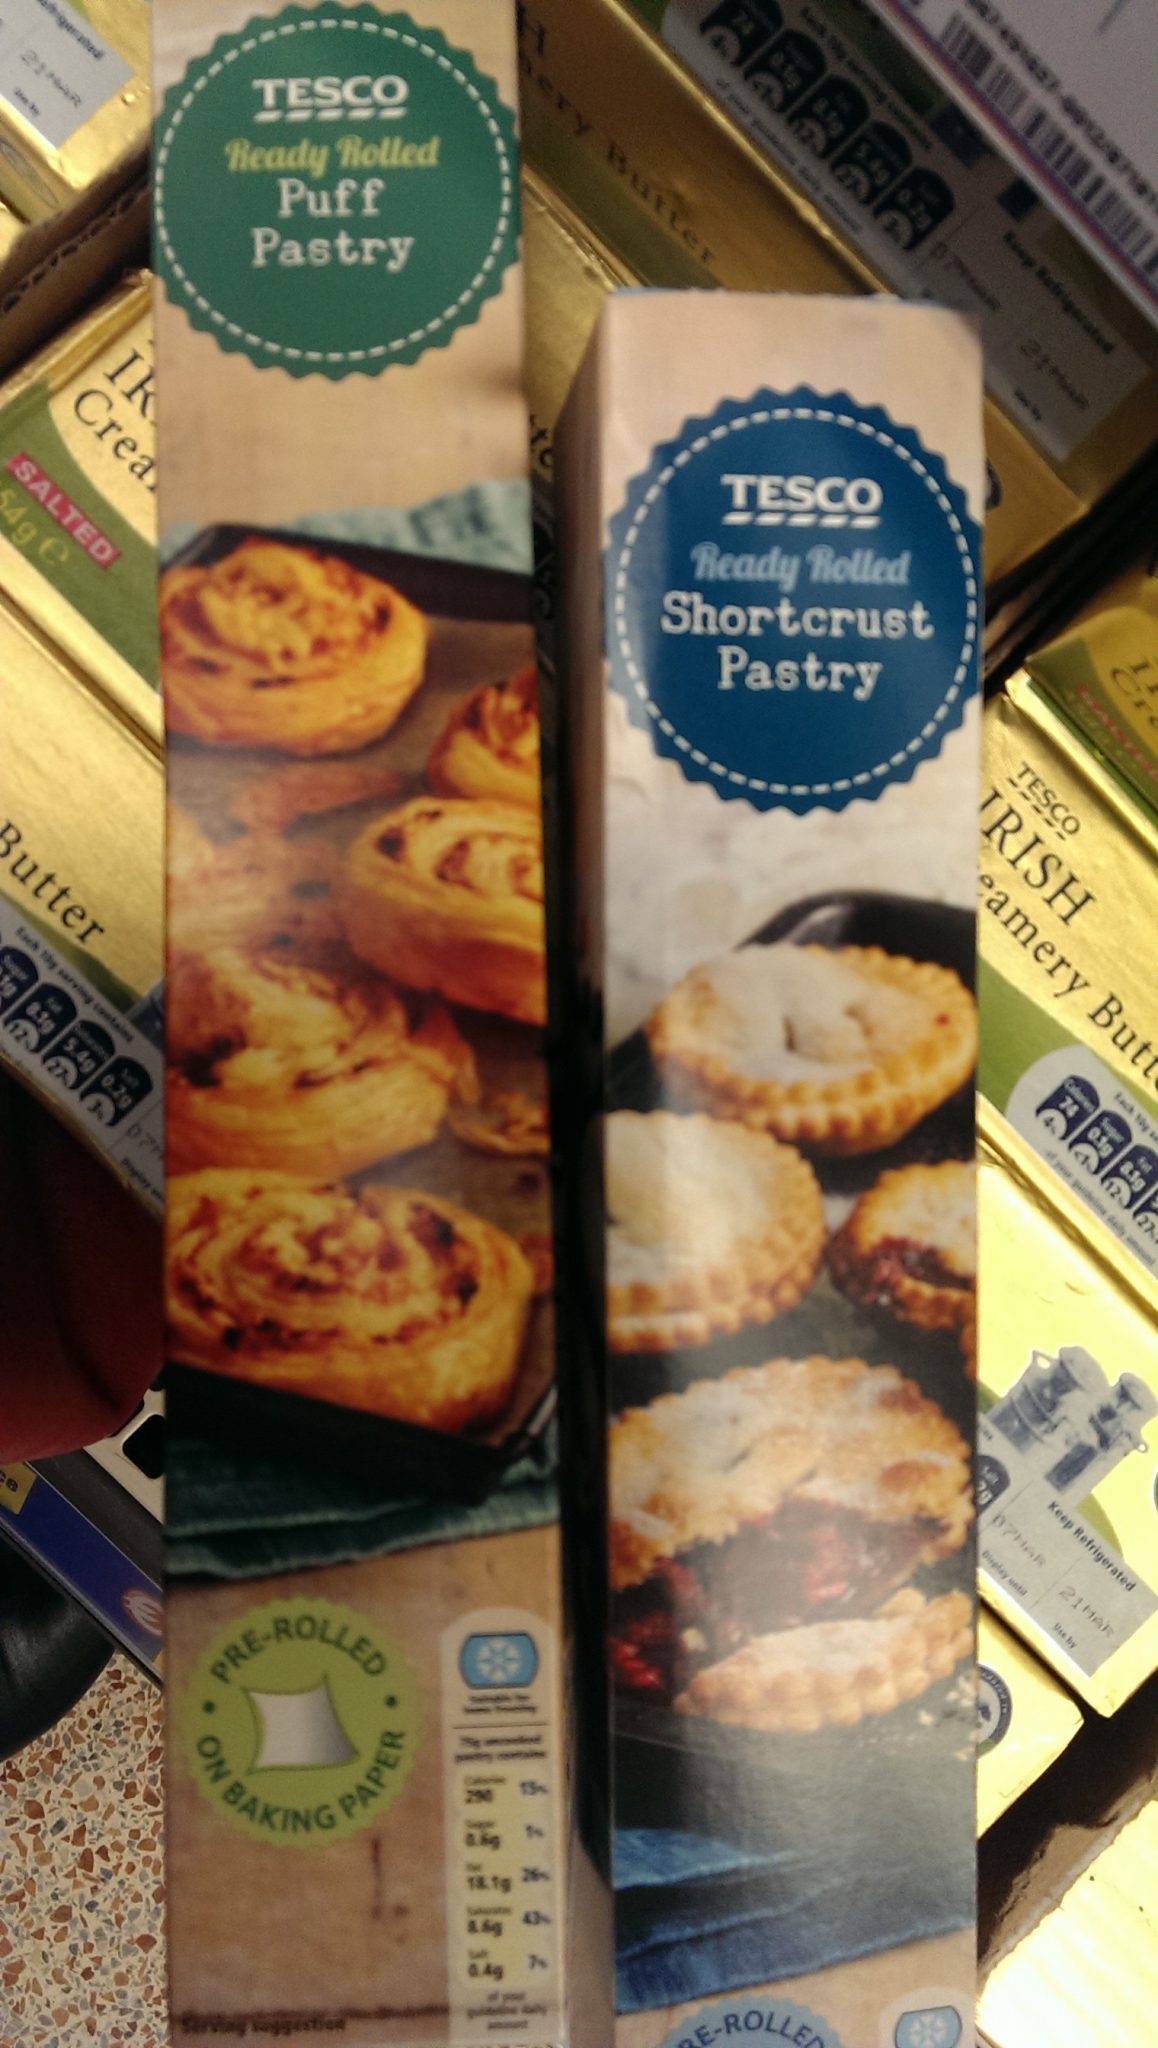 Microprocessor Mooie jurk tuin Tesco Ready Rolled Puff Pastry - dairy free kids